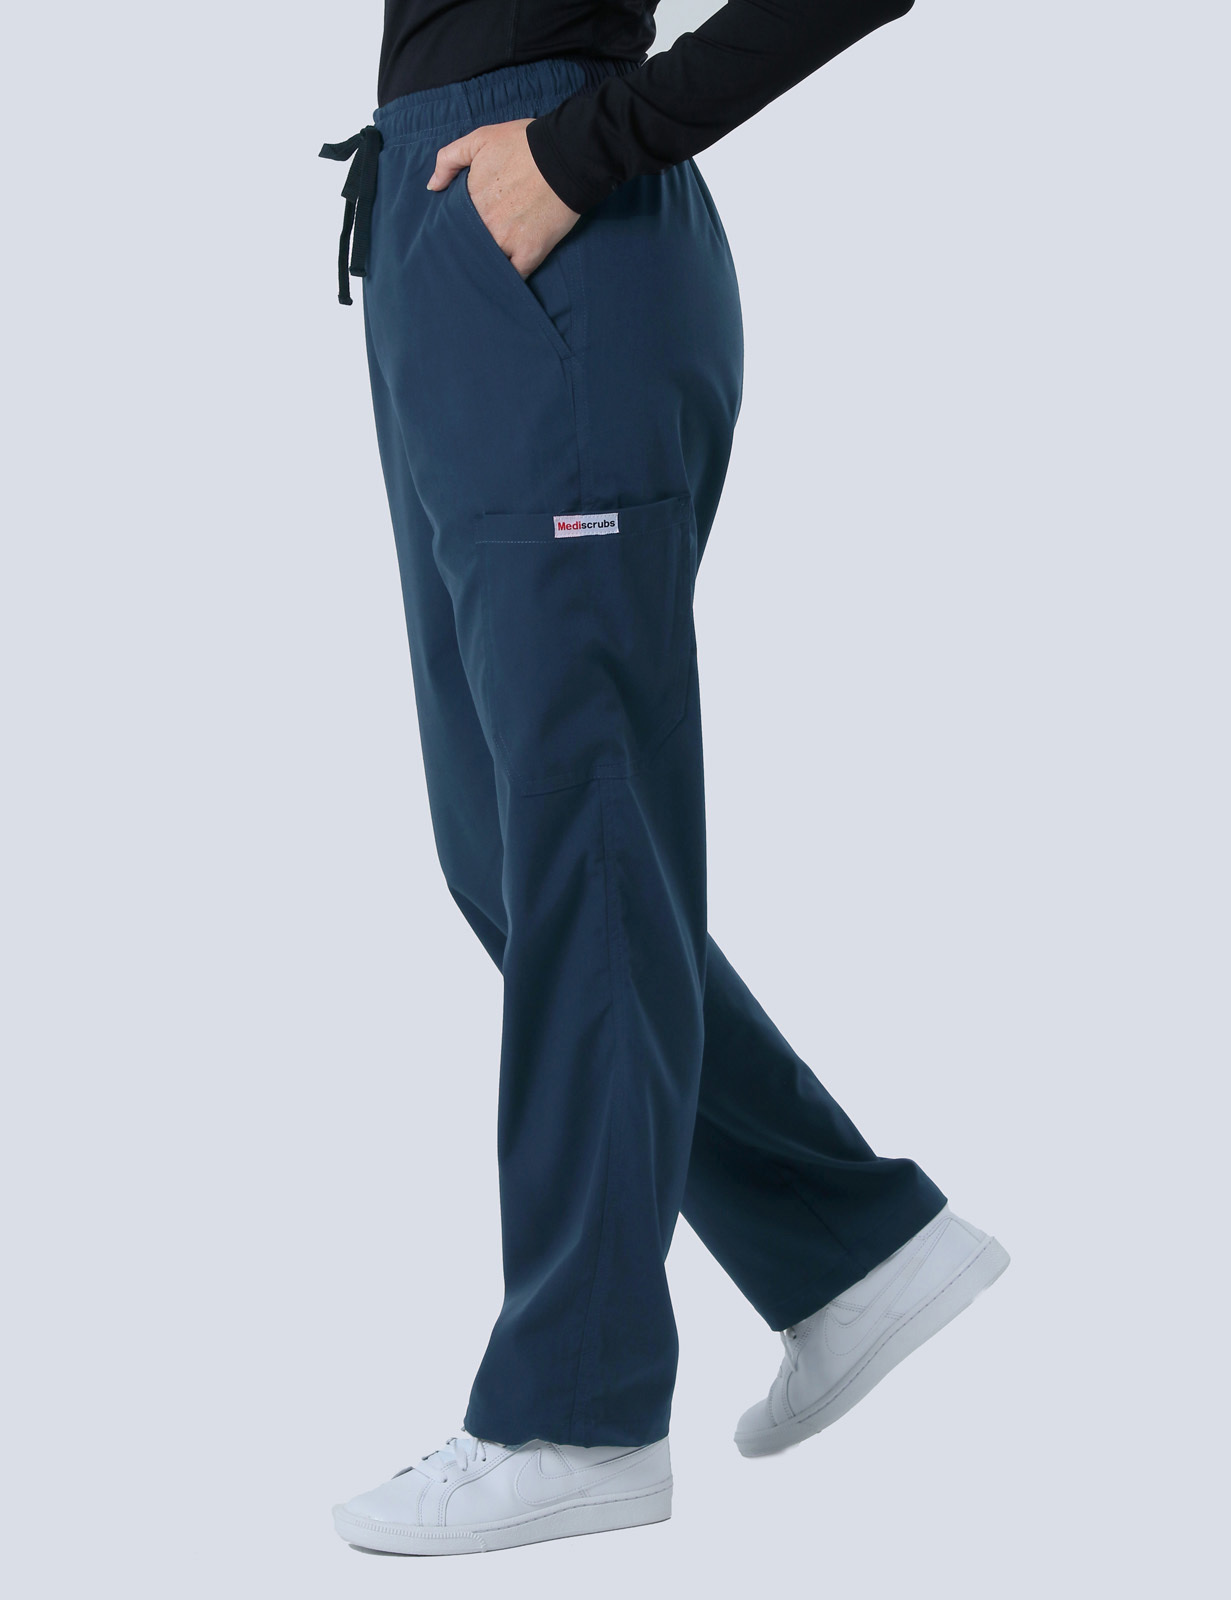 RBWH - 7a South RN (Women's Fit Spandex with Cargos in Navy + Logos)